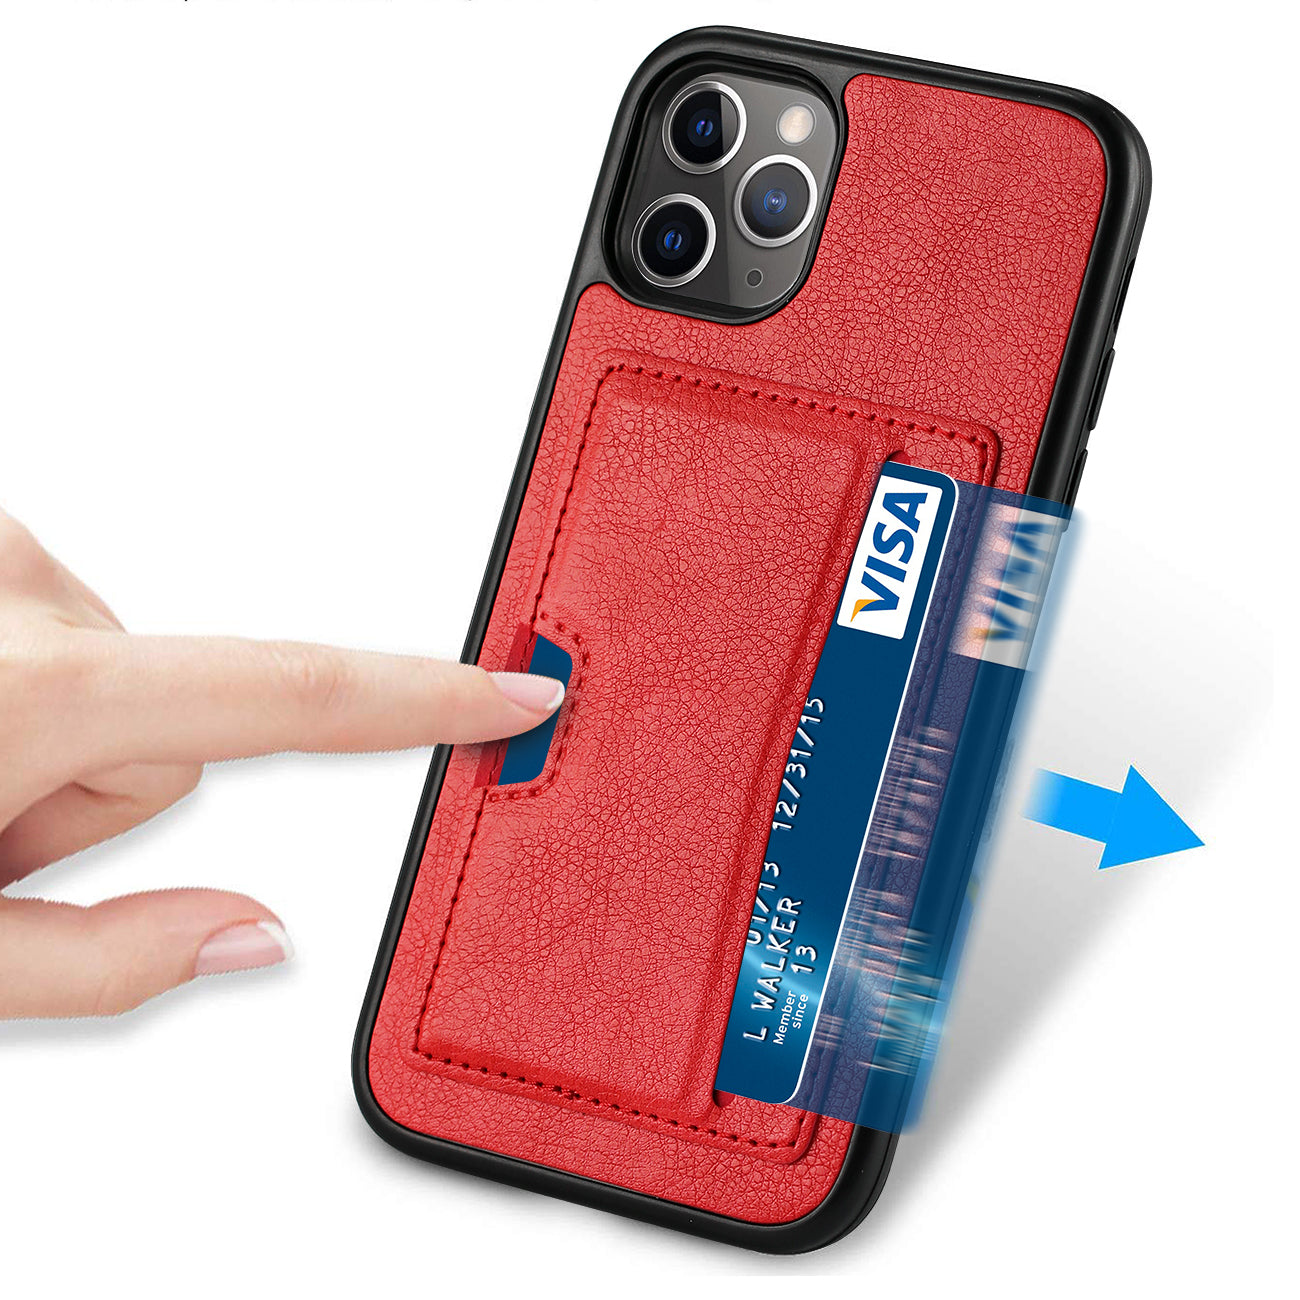 Reiko APPLE IPHONE 11 PRO Card Pocket Case In Red